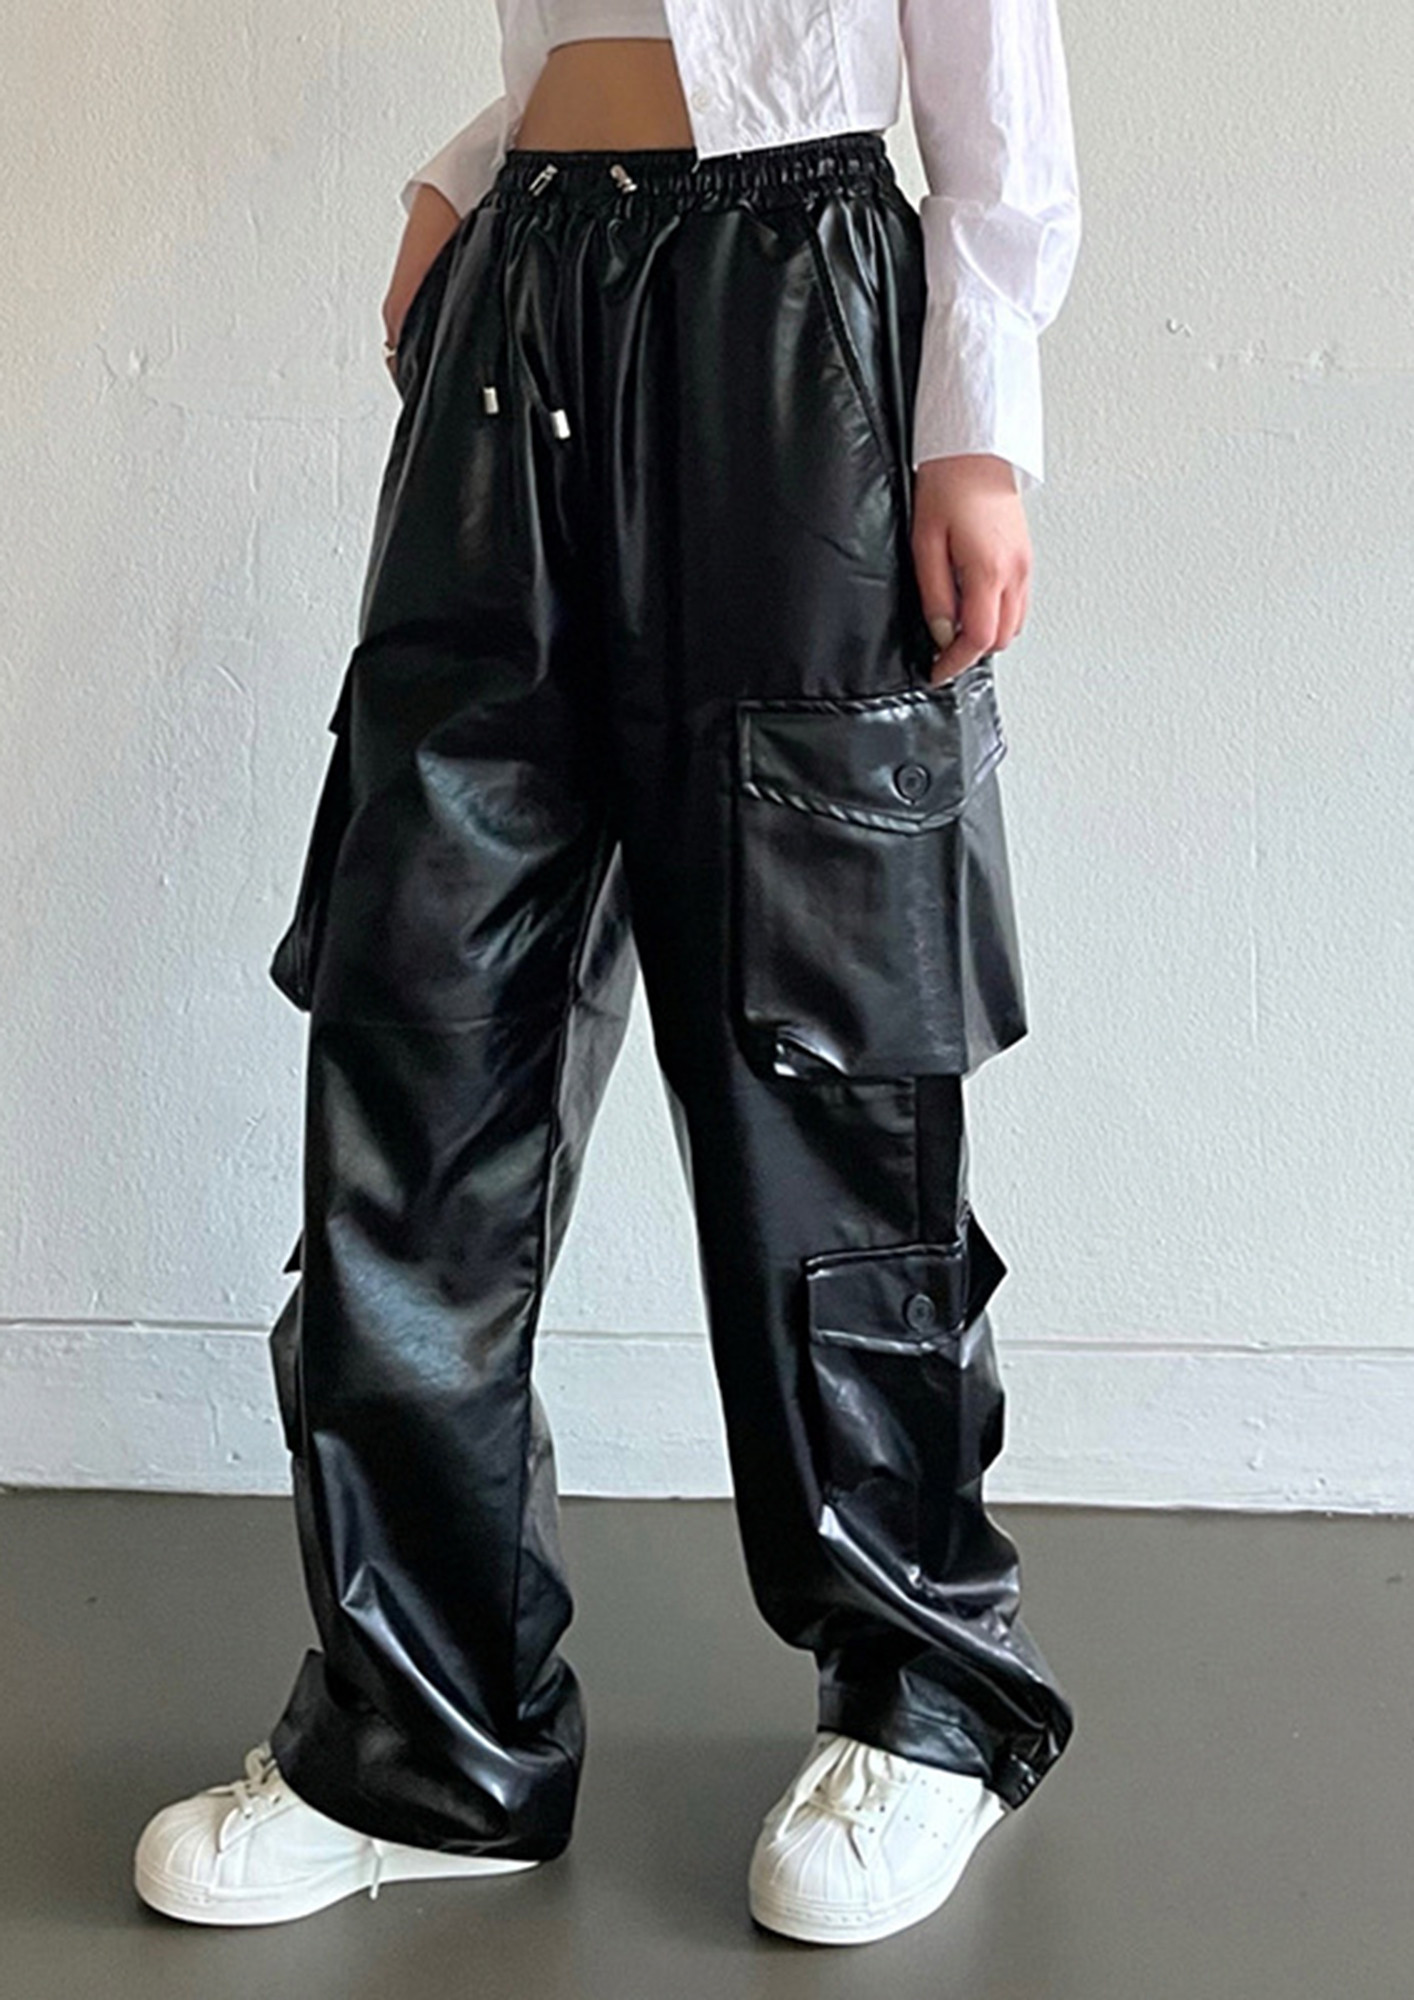 Buy The Souled Store Solids Black Women Cargo Pant online